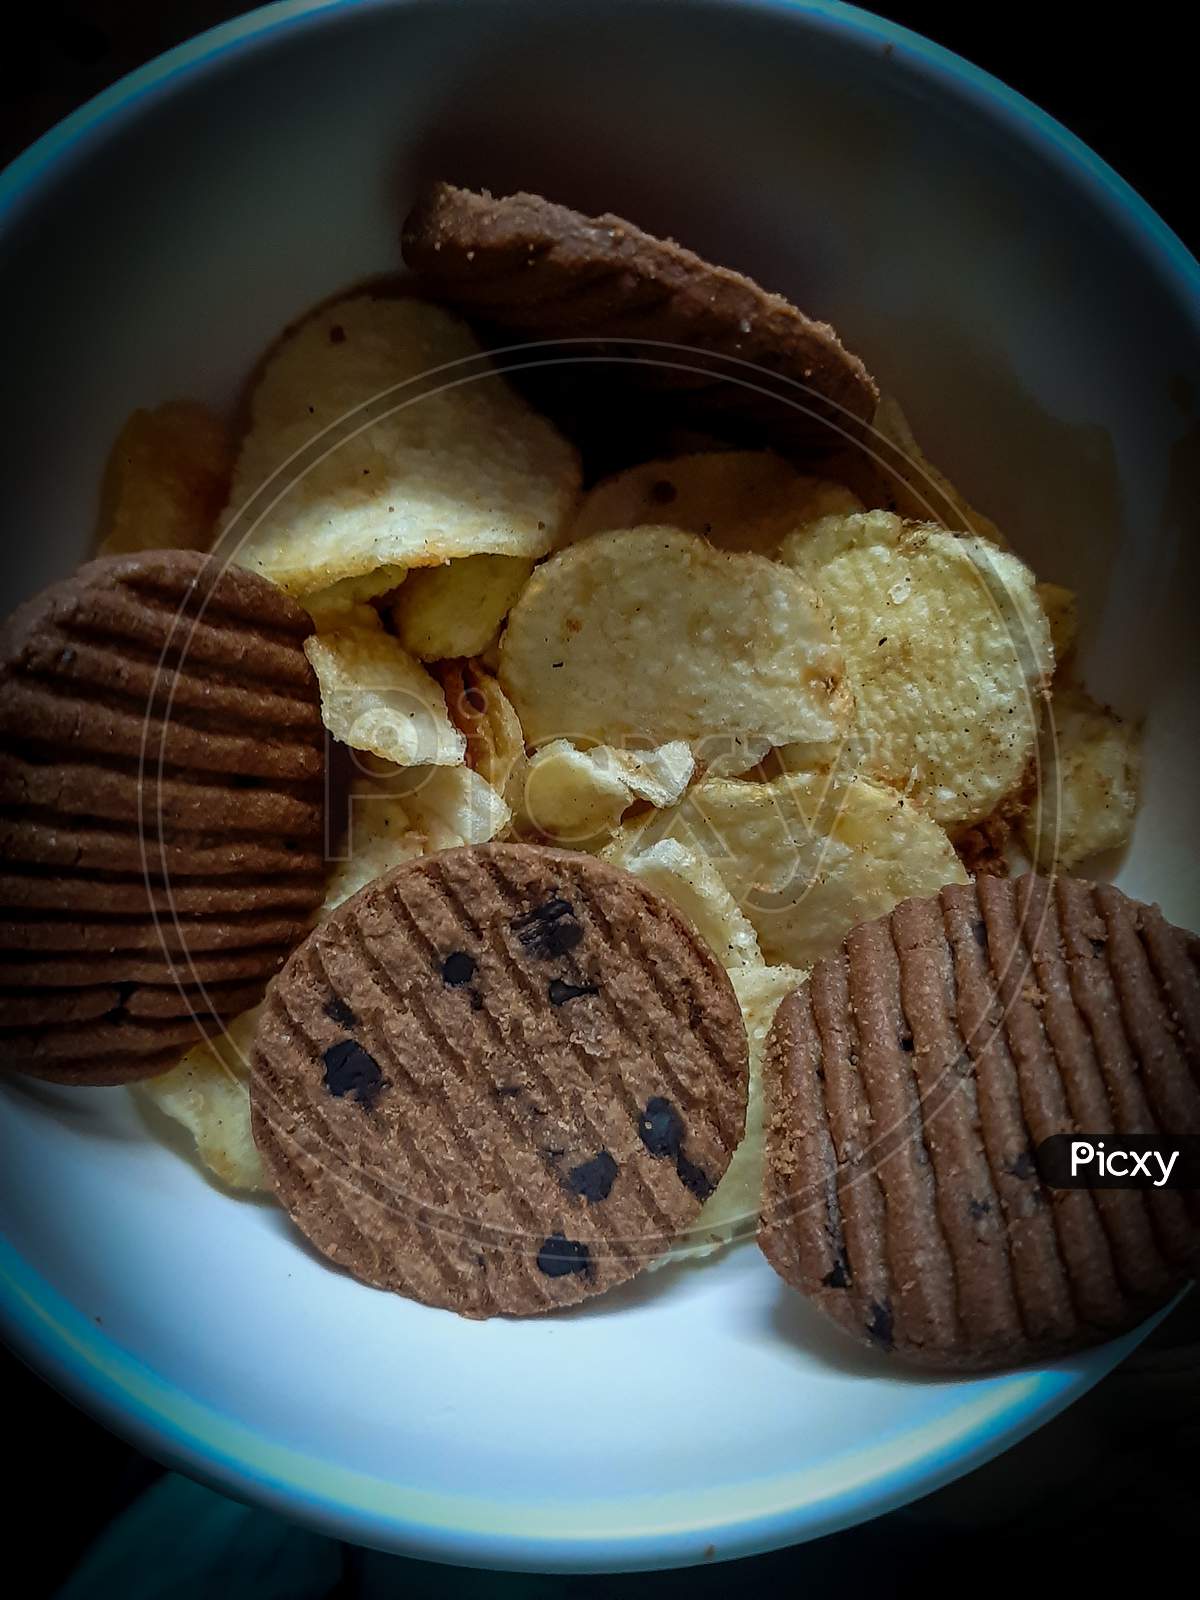 Testy choko biscuit and potato chips with black background.